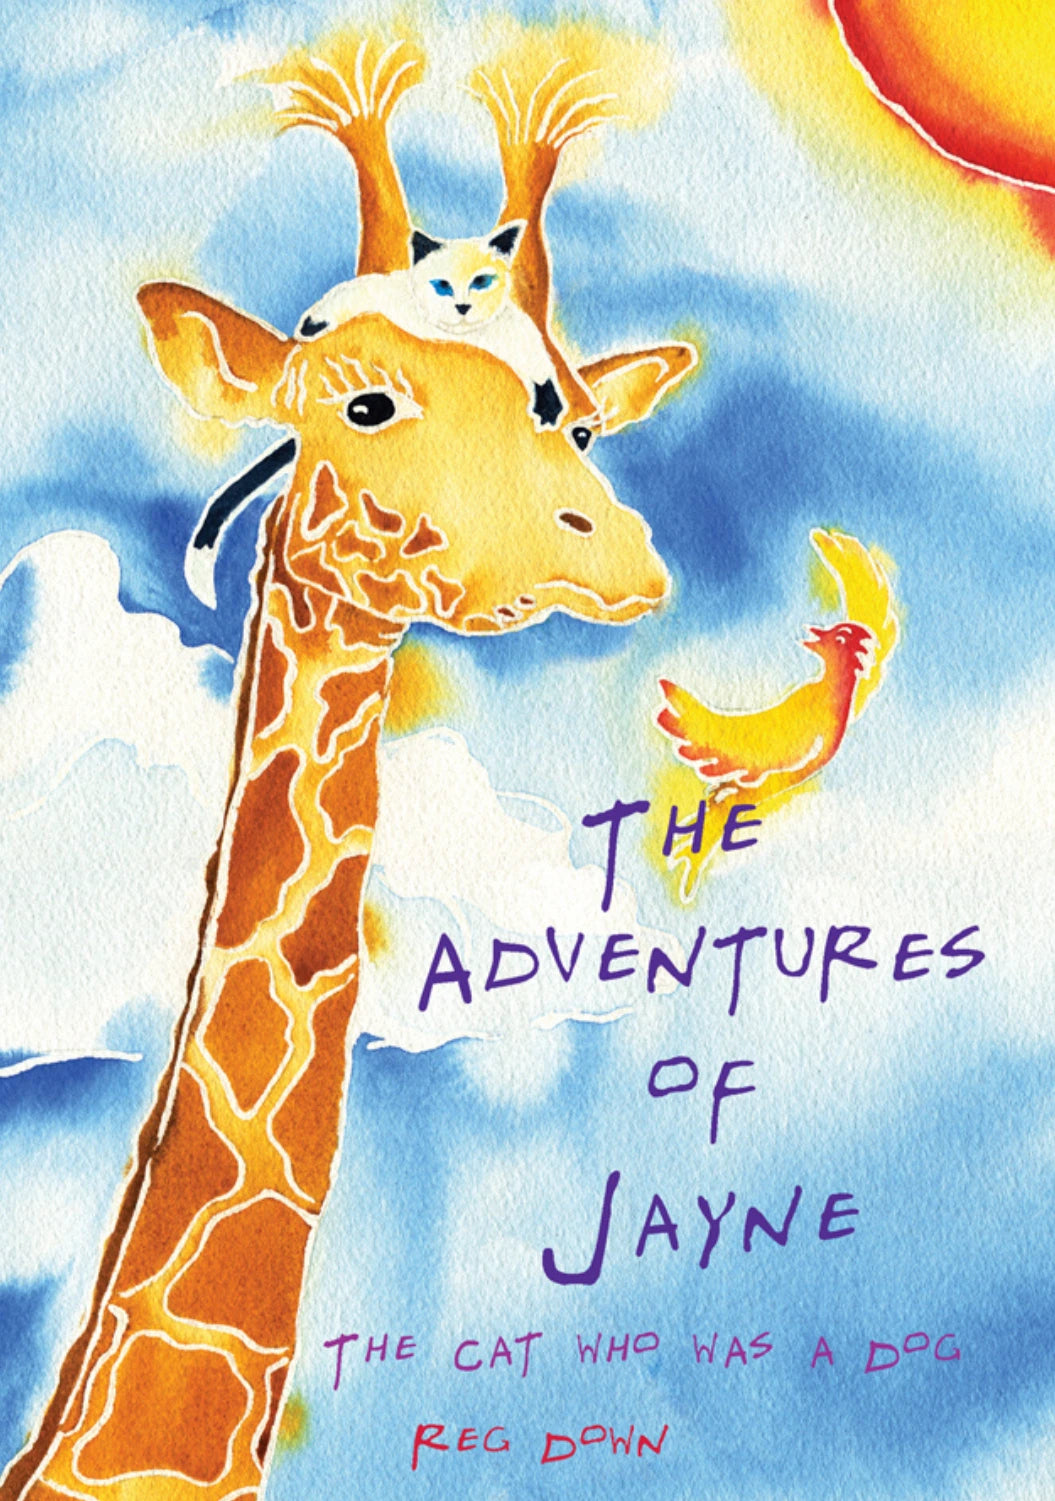 The Adventures of Jayne - The Cat Who Was A Dog by Reg Down - Alder & Alouette